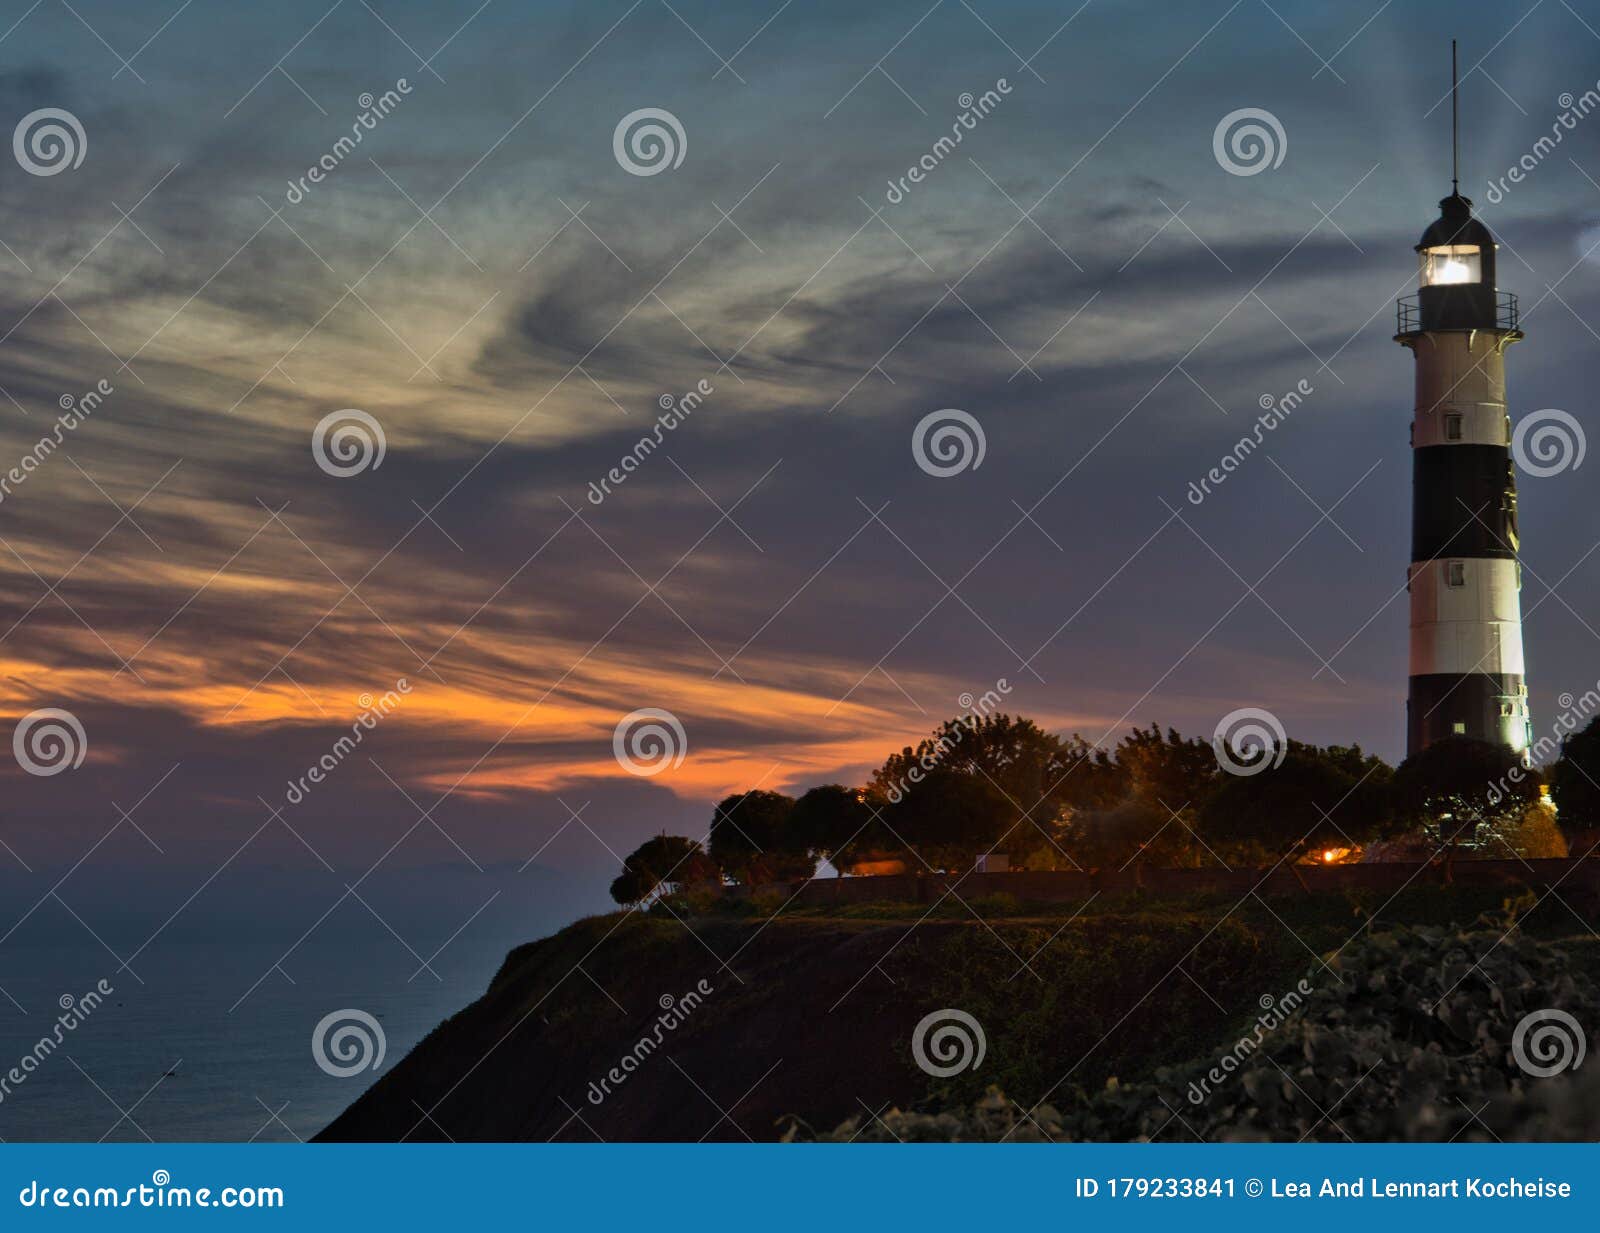 miraflores` famous historical lighthouse on the pacific coast of lima in orange / golden sunset light